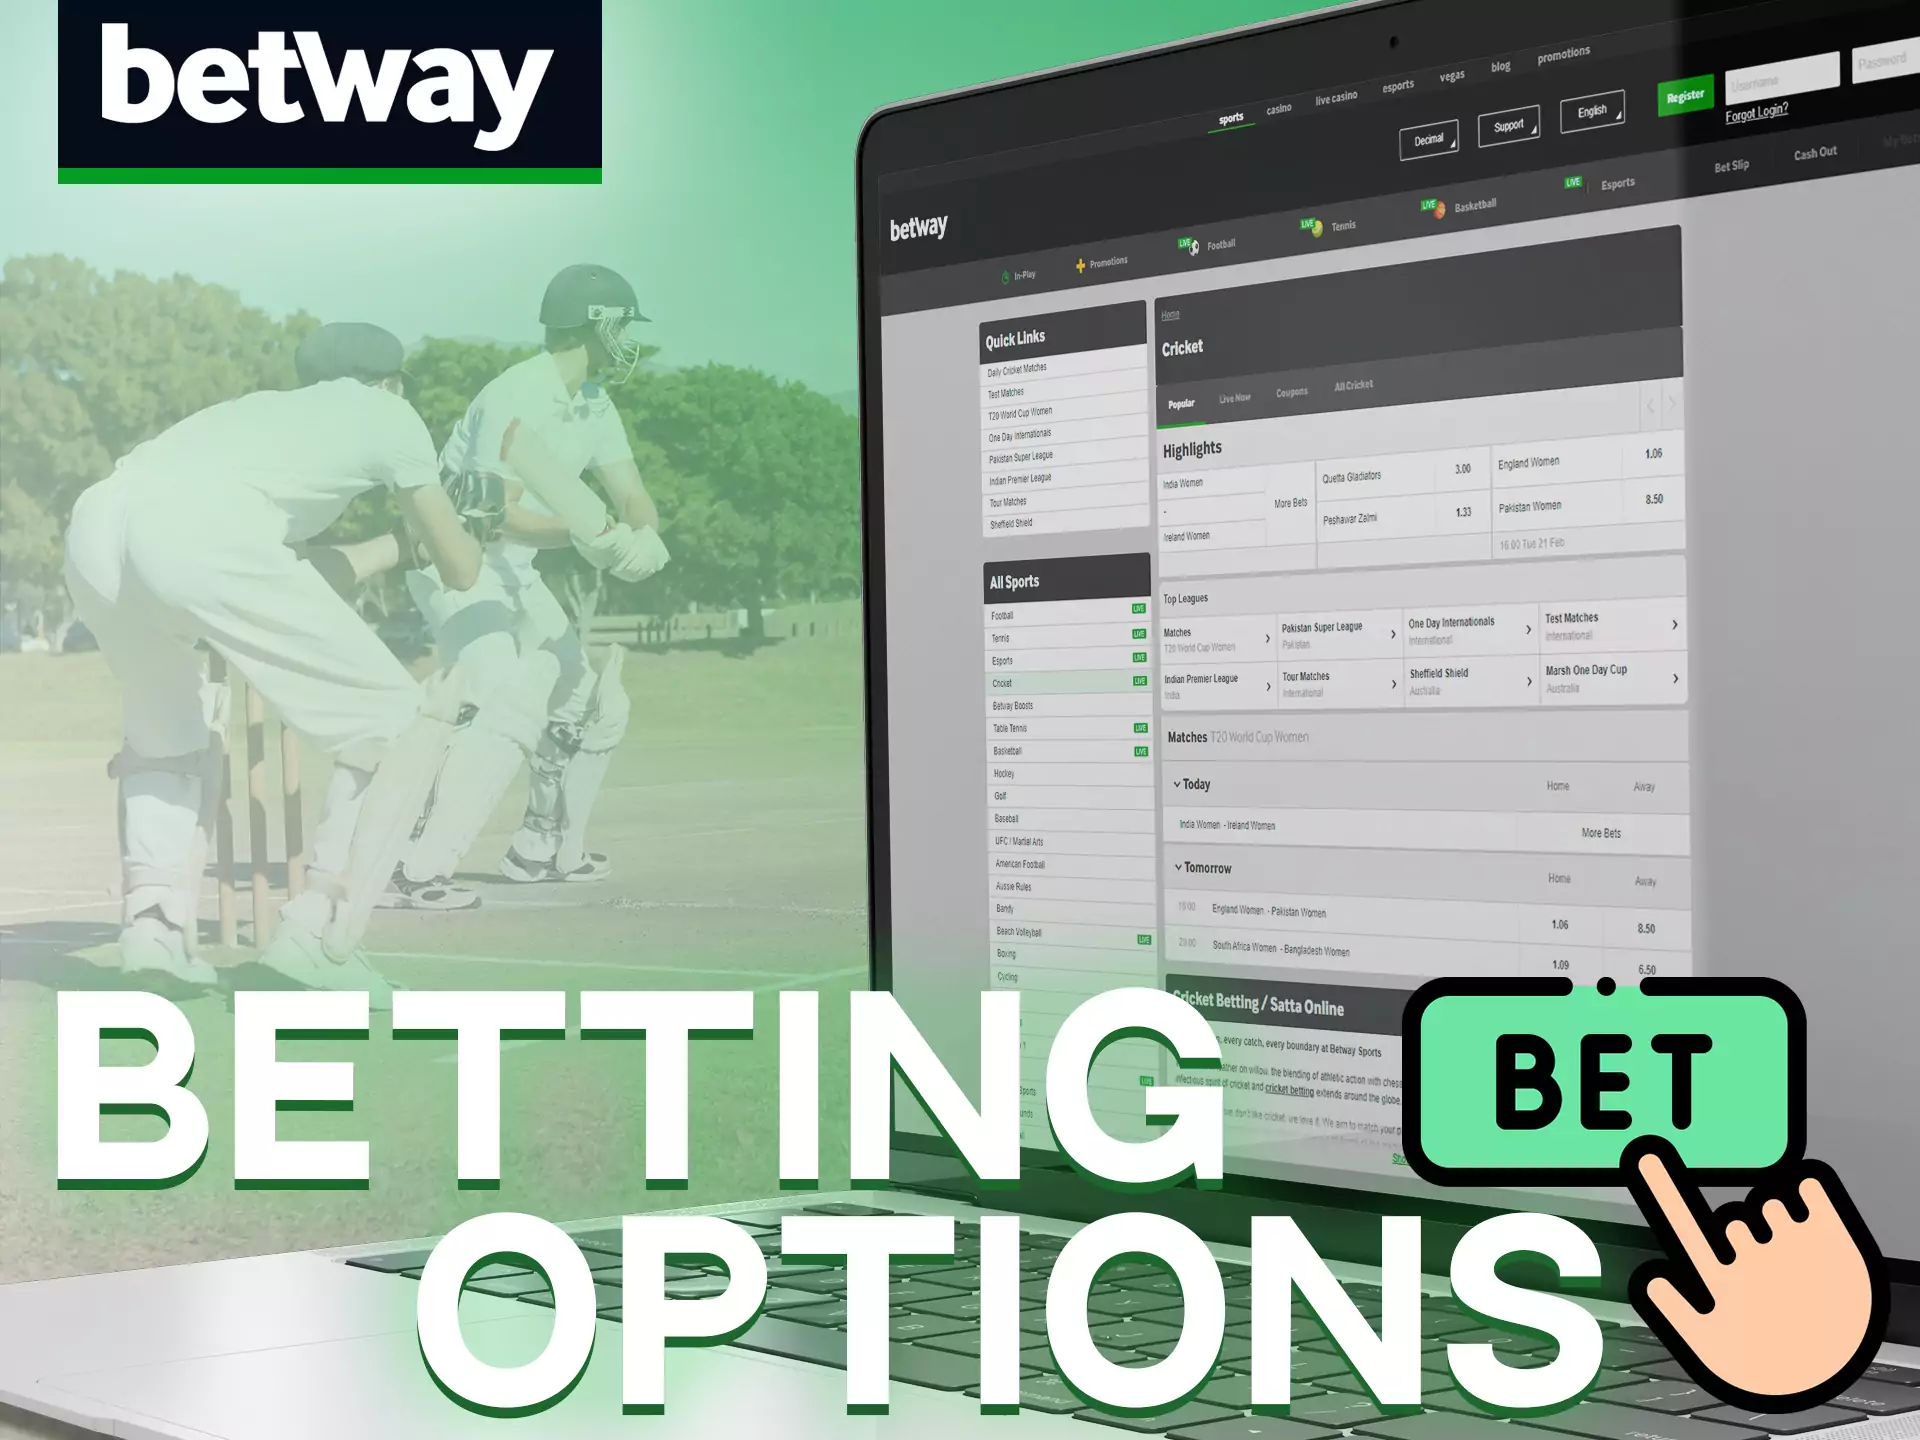 Bet how you want with Betway.